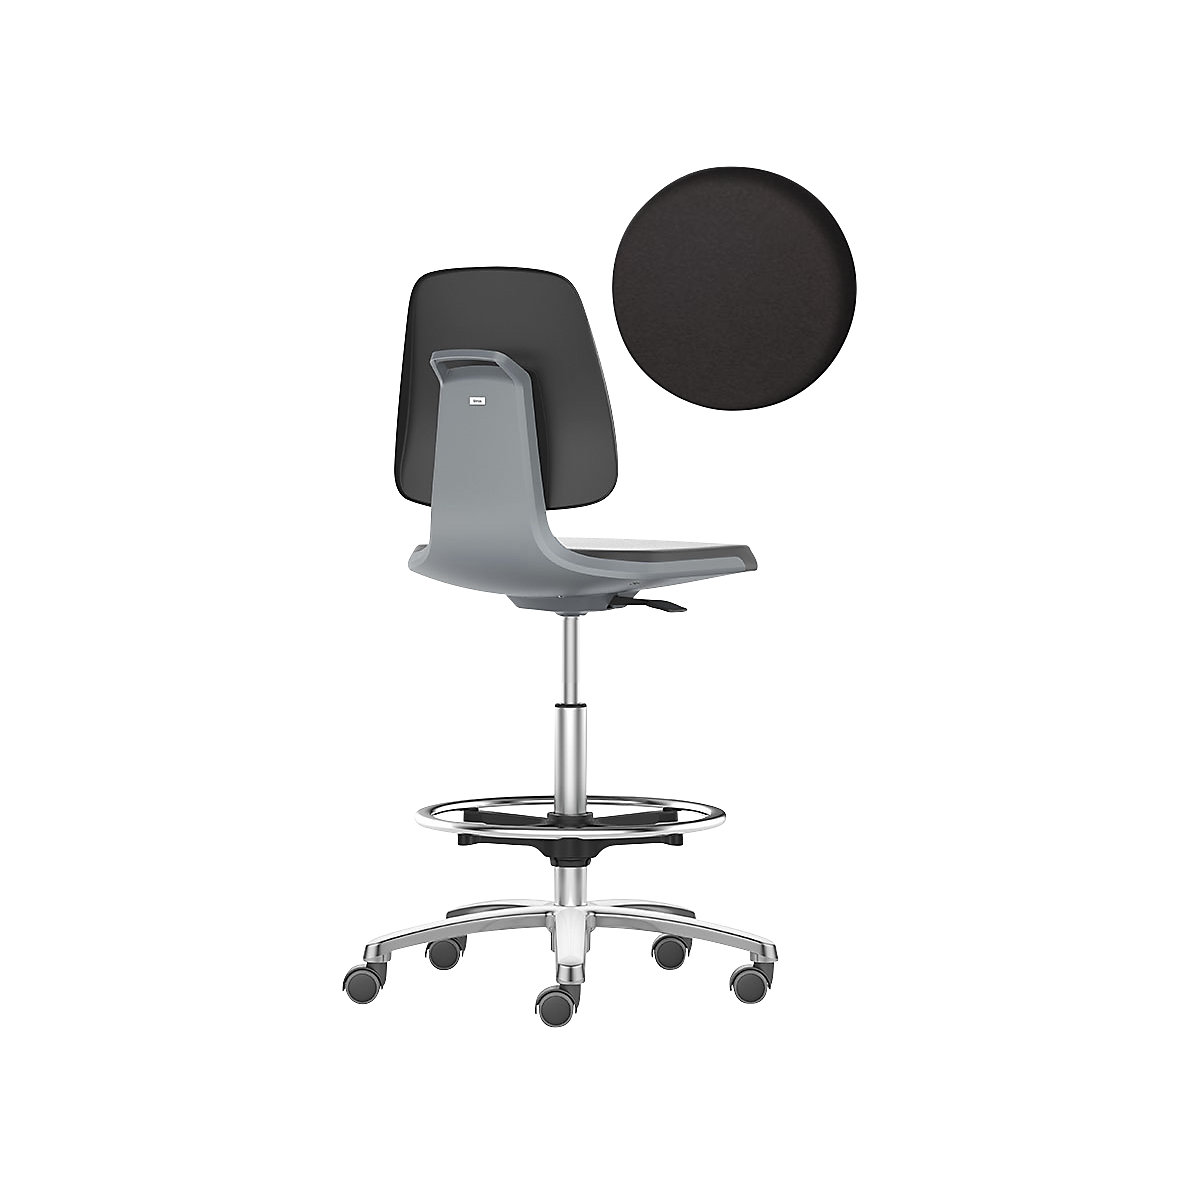 LABSIT industrial swivel chair – bimos, high chair with sit-stop castors and foot ring, vinyl upholstered seat, charcoal-21